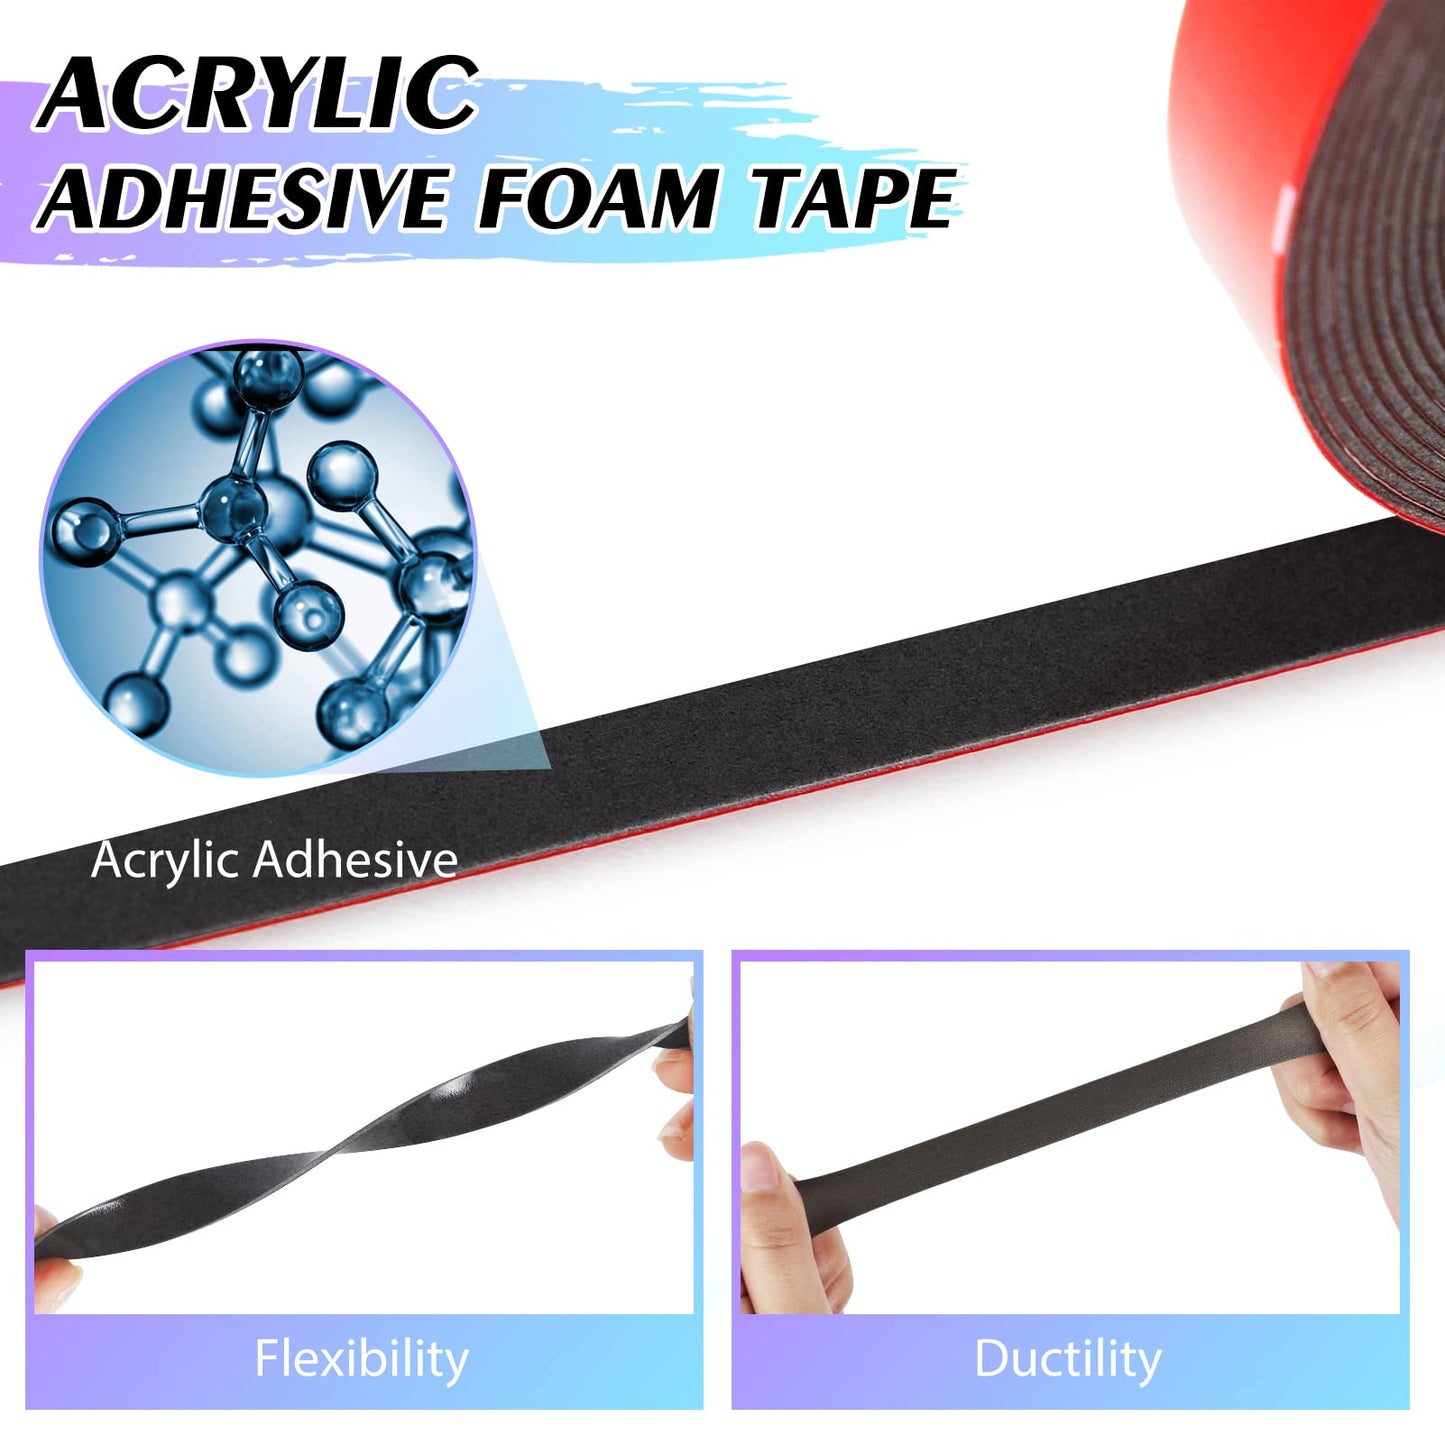 Double Sided Tape, Heavy Duty Mounting Tape, 16.5FT x 0.94IN Adhesive Foam Tape Made